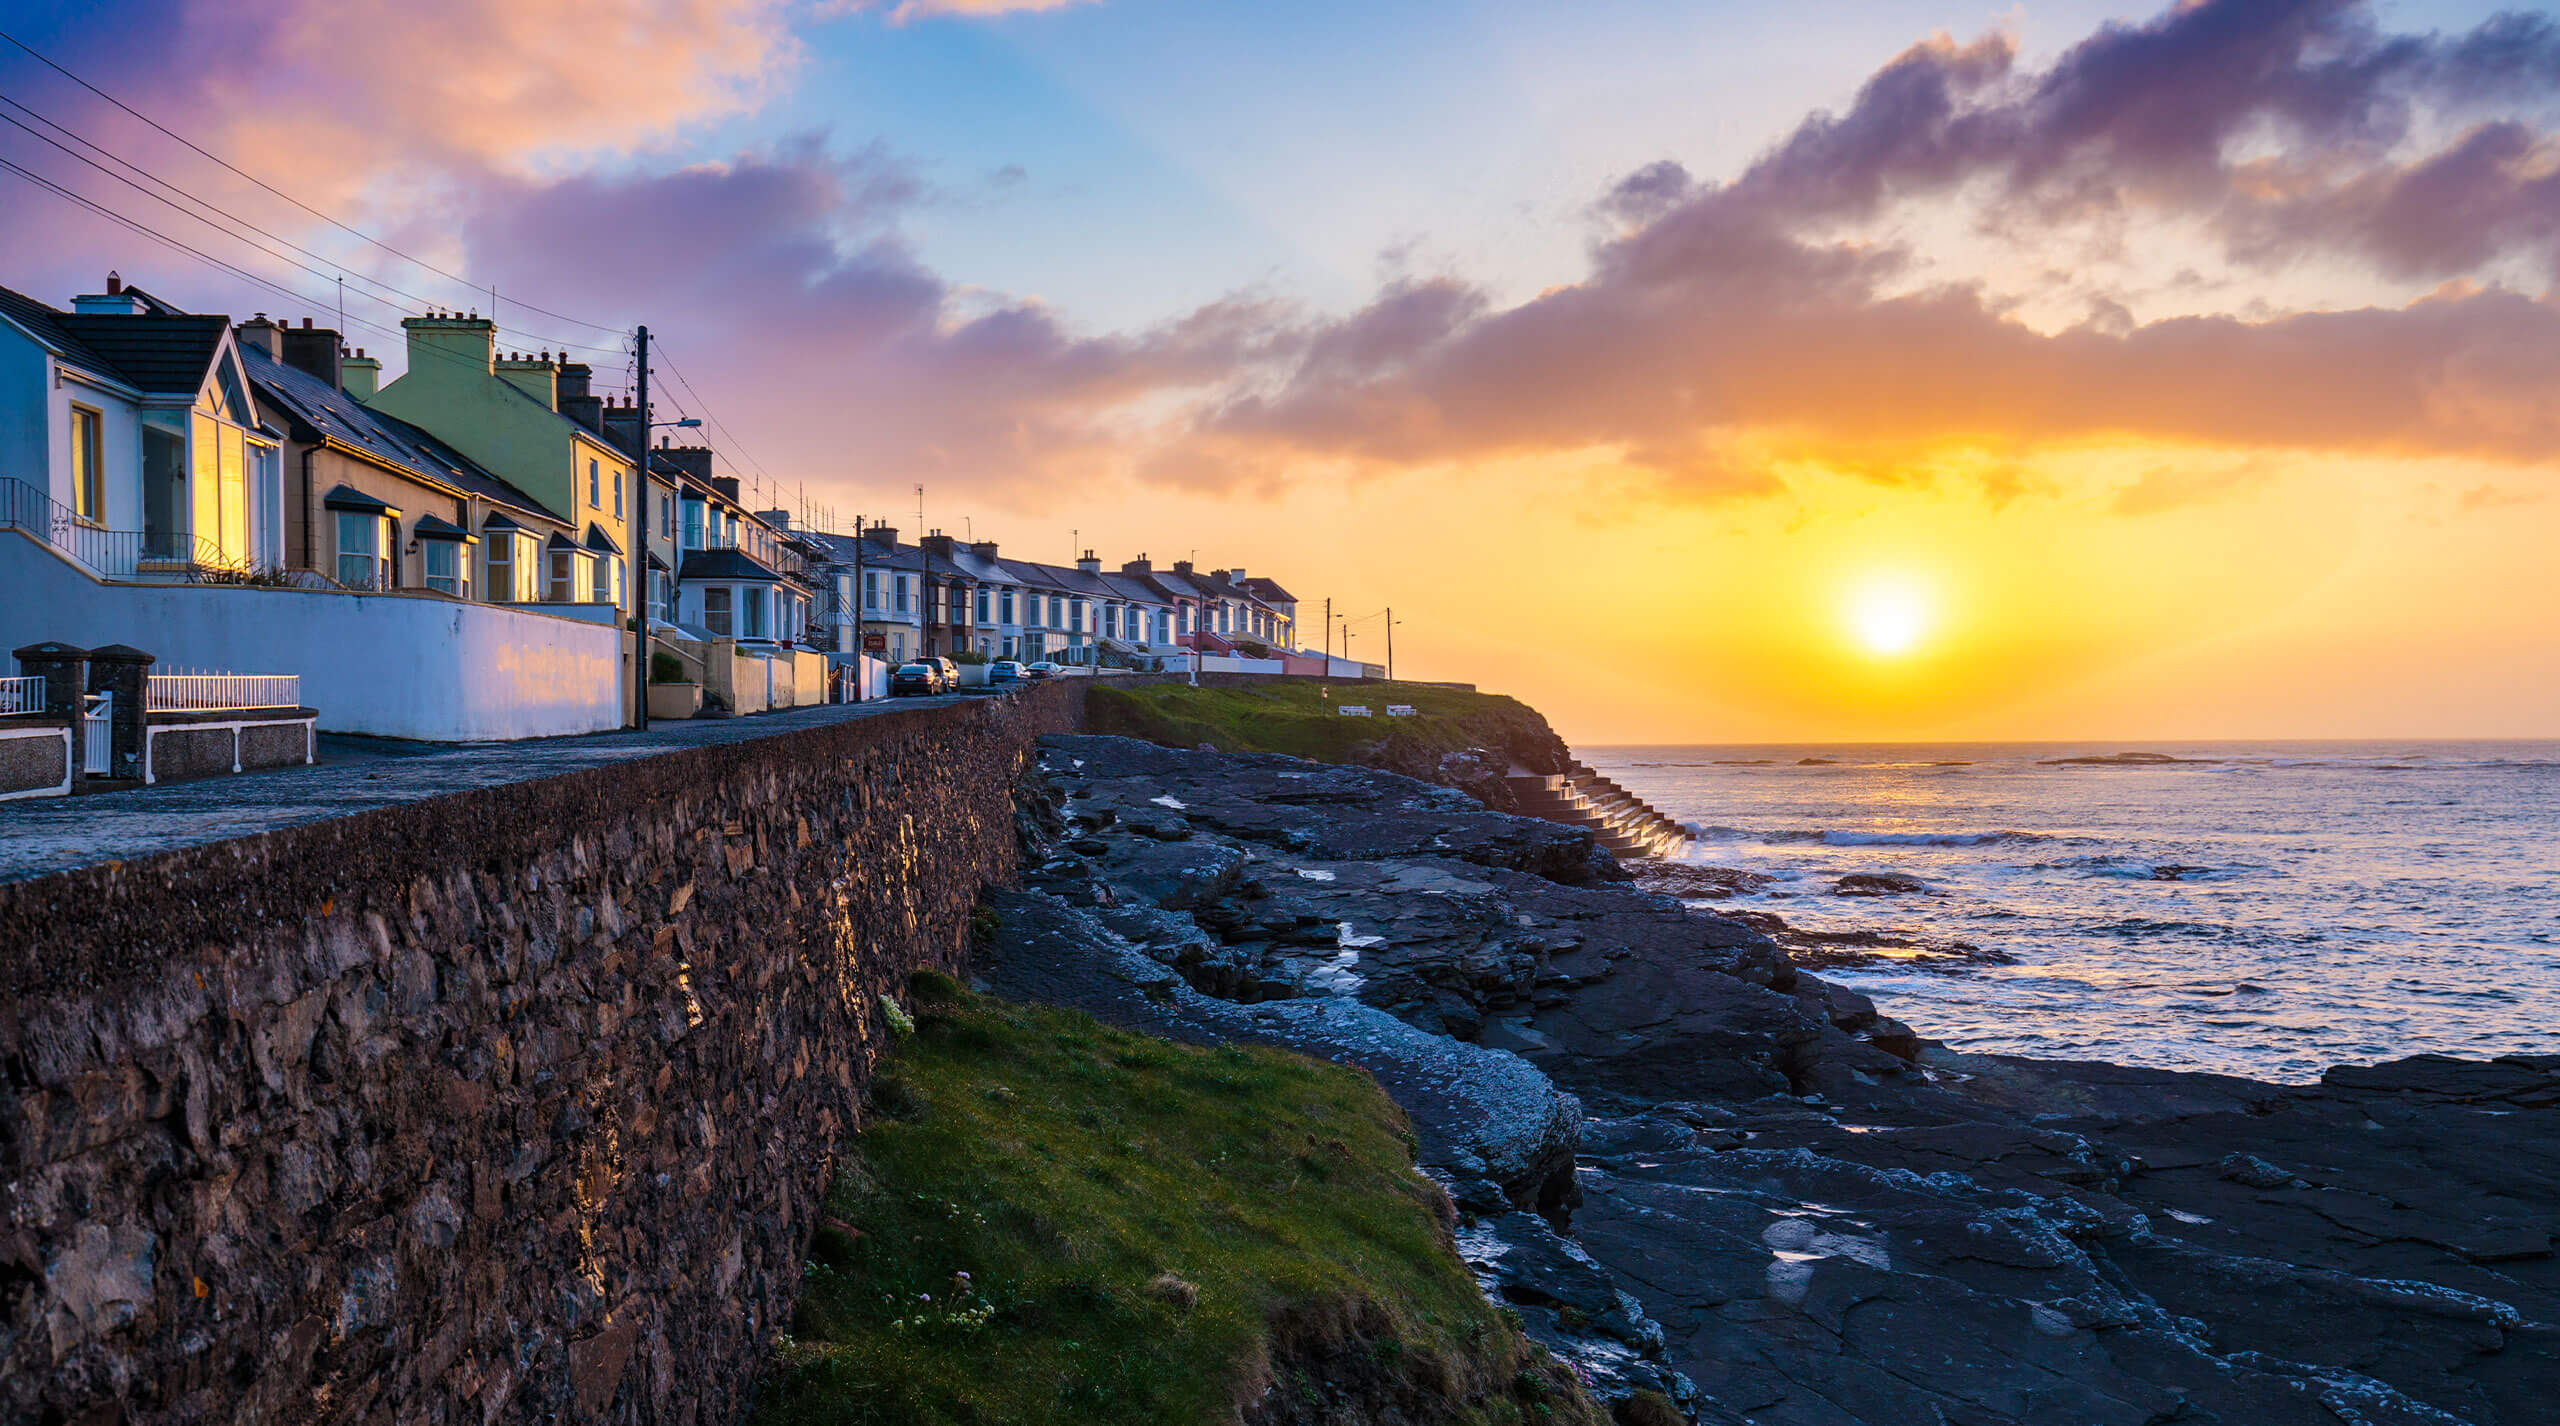 Summer short breaks holiday homes in Ireland; the town of Kilkee in Ireland and a beautiful sunset seen from the shore.